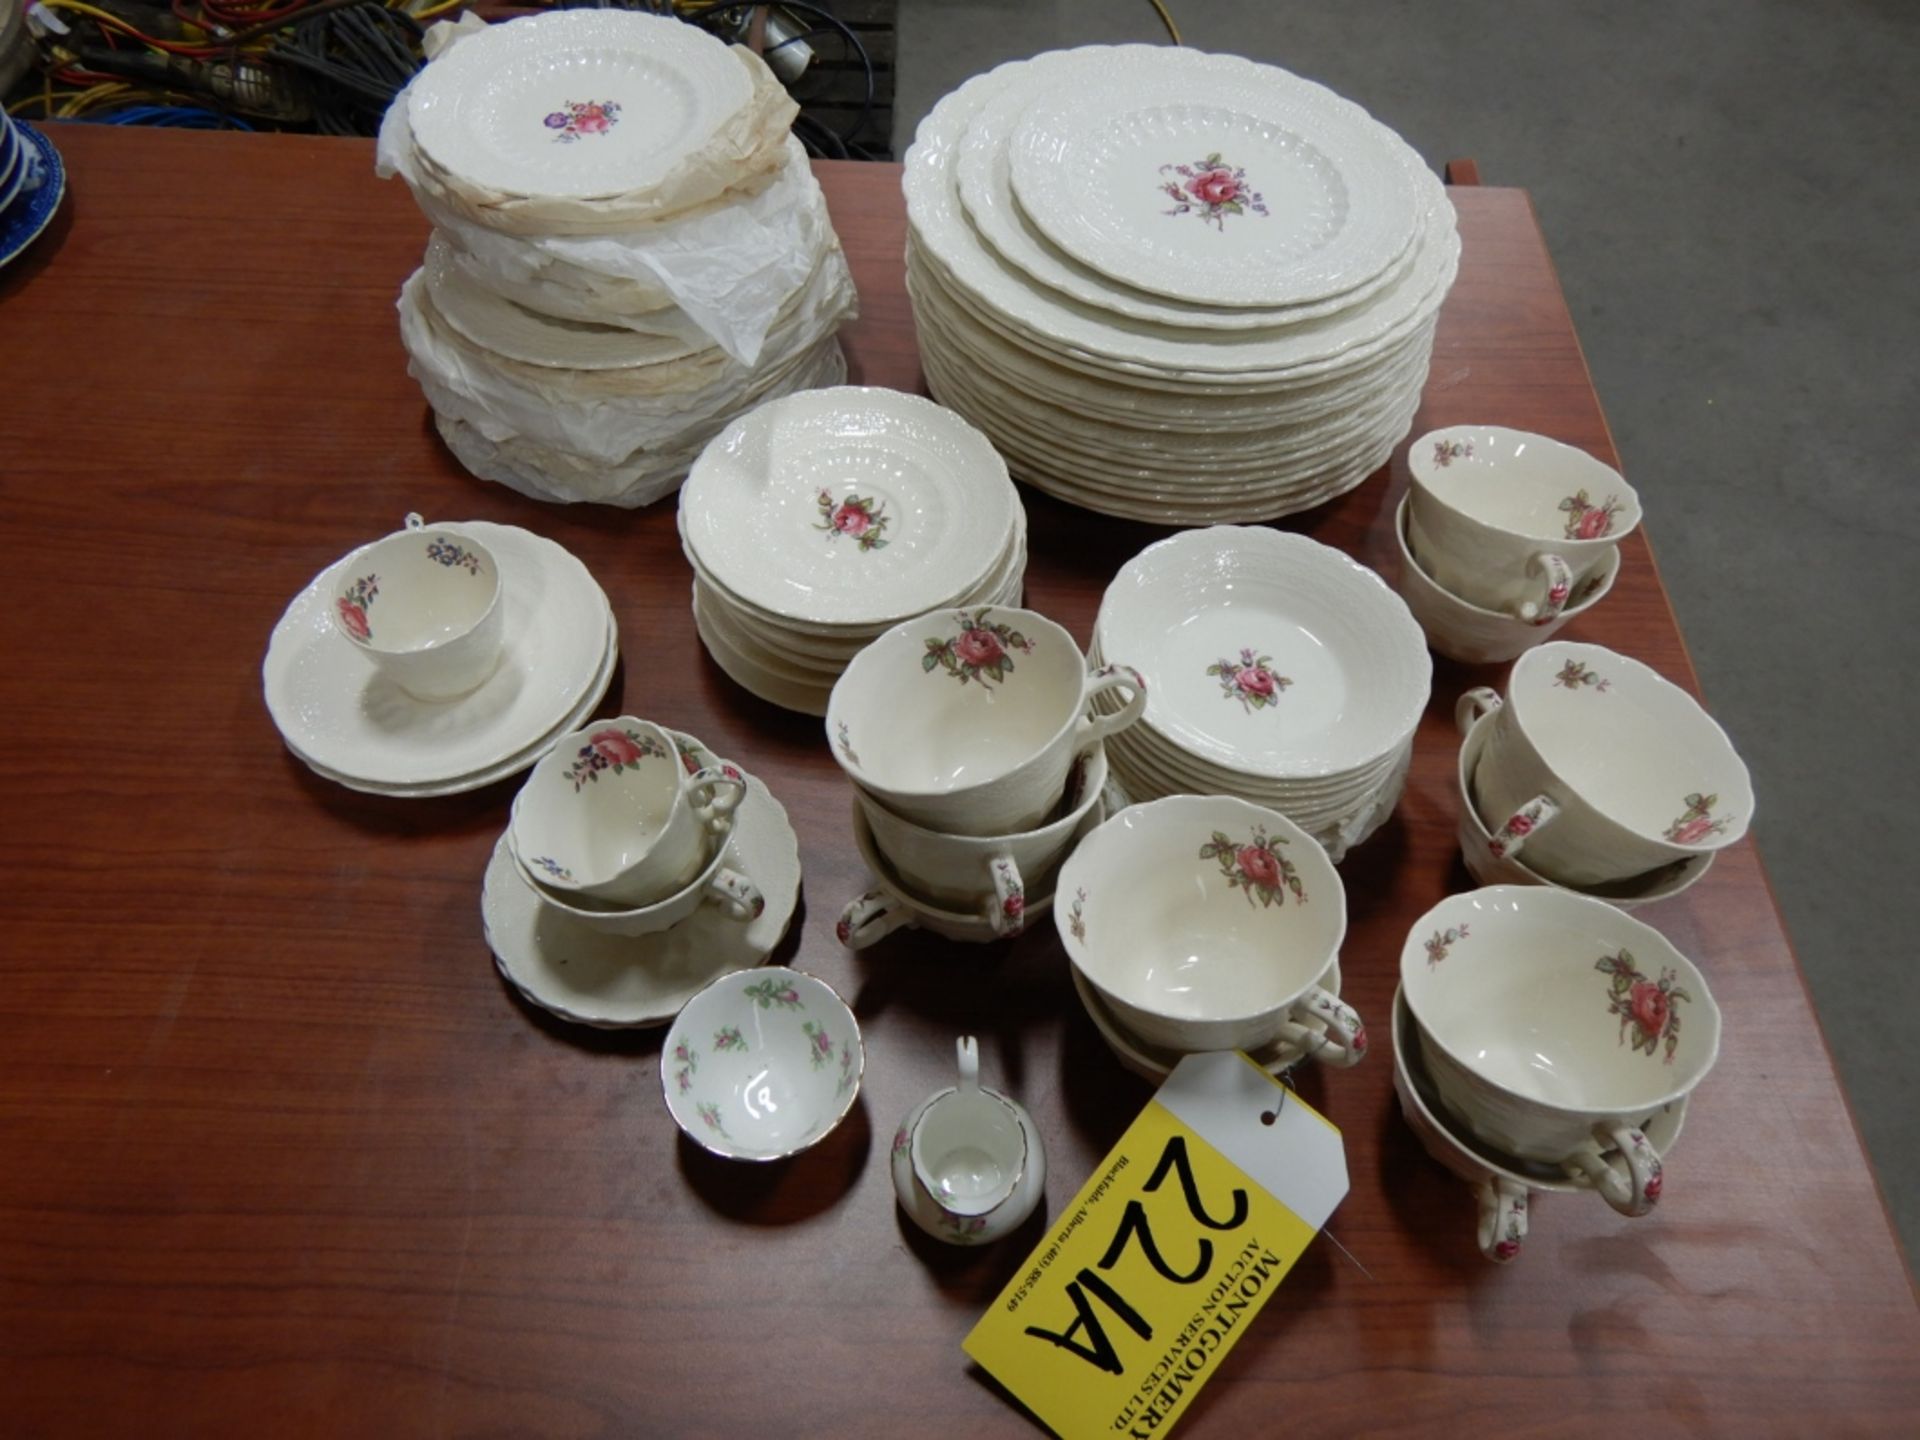 L/O SPODE BILLINGSLEY ROSE ENGLISH CHINA APPROX. 12 PLACE SETTINGS OF 12IN PLATES, 8IN SIDE